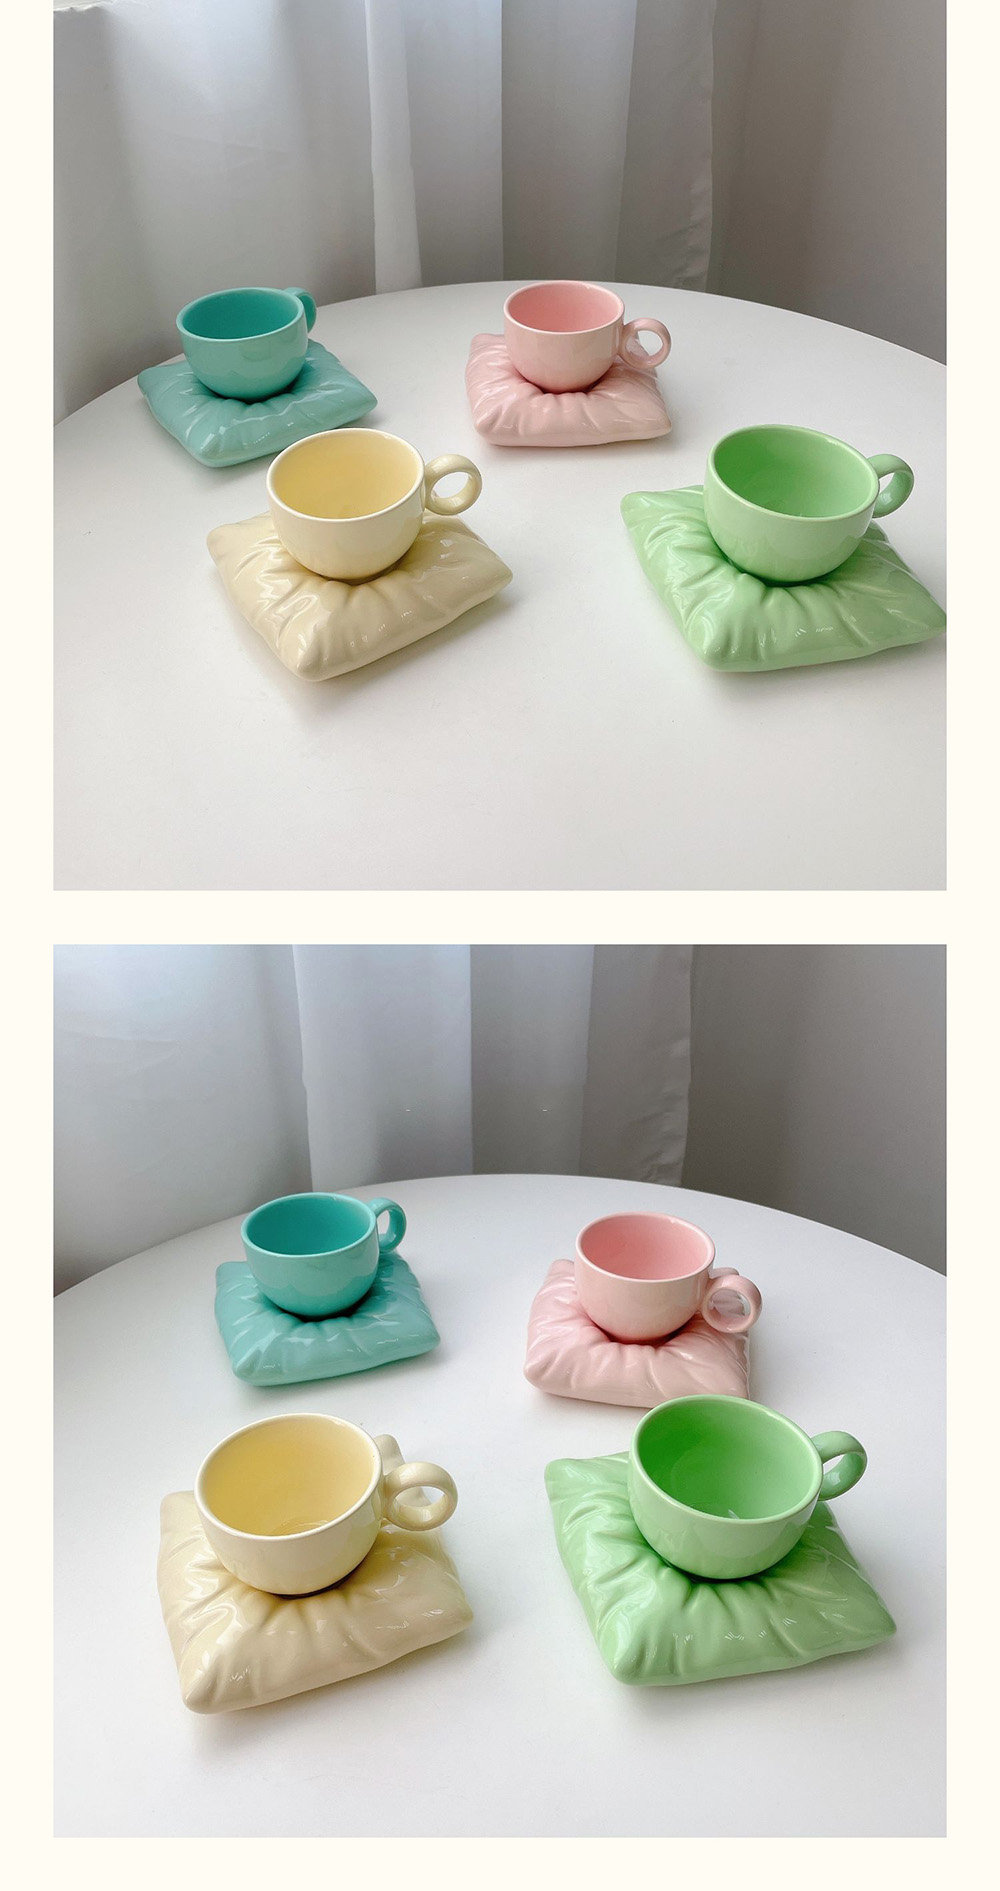 Solid Colored Mug - With Pillow Coaster - Porcelain - Pink - Yellow - 6 ...